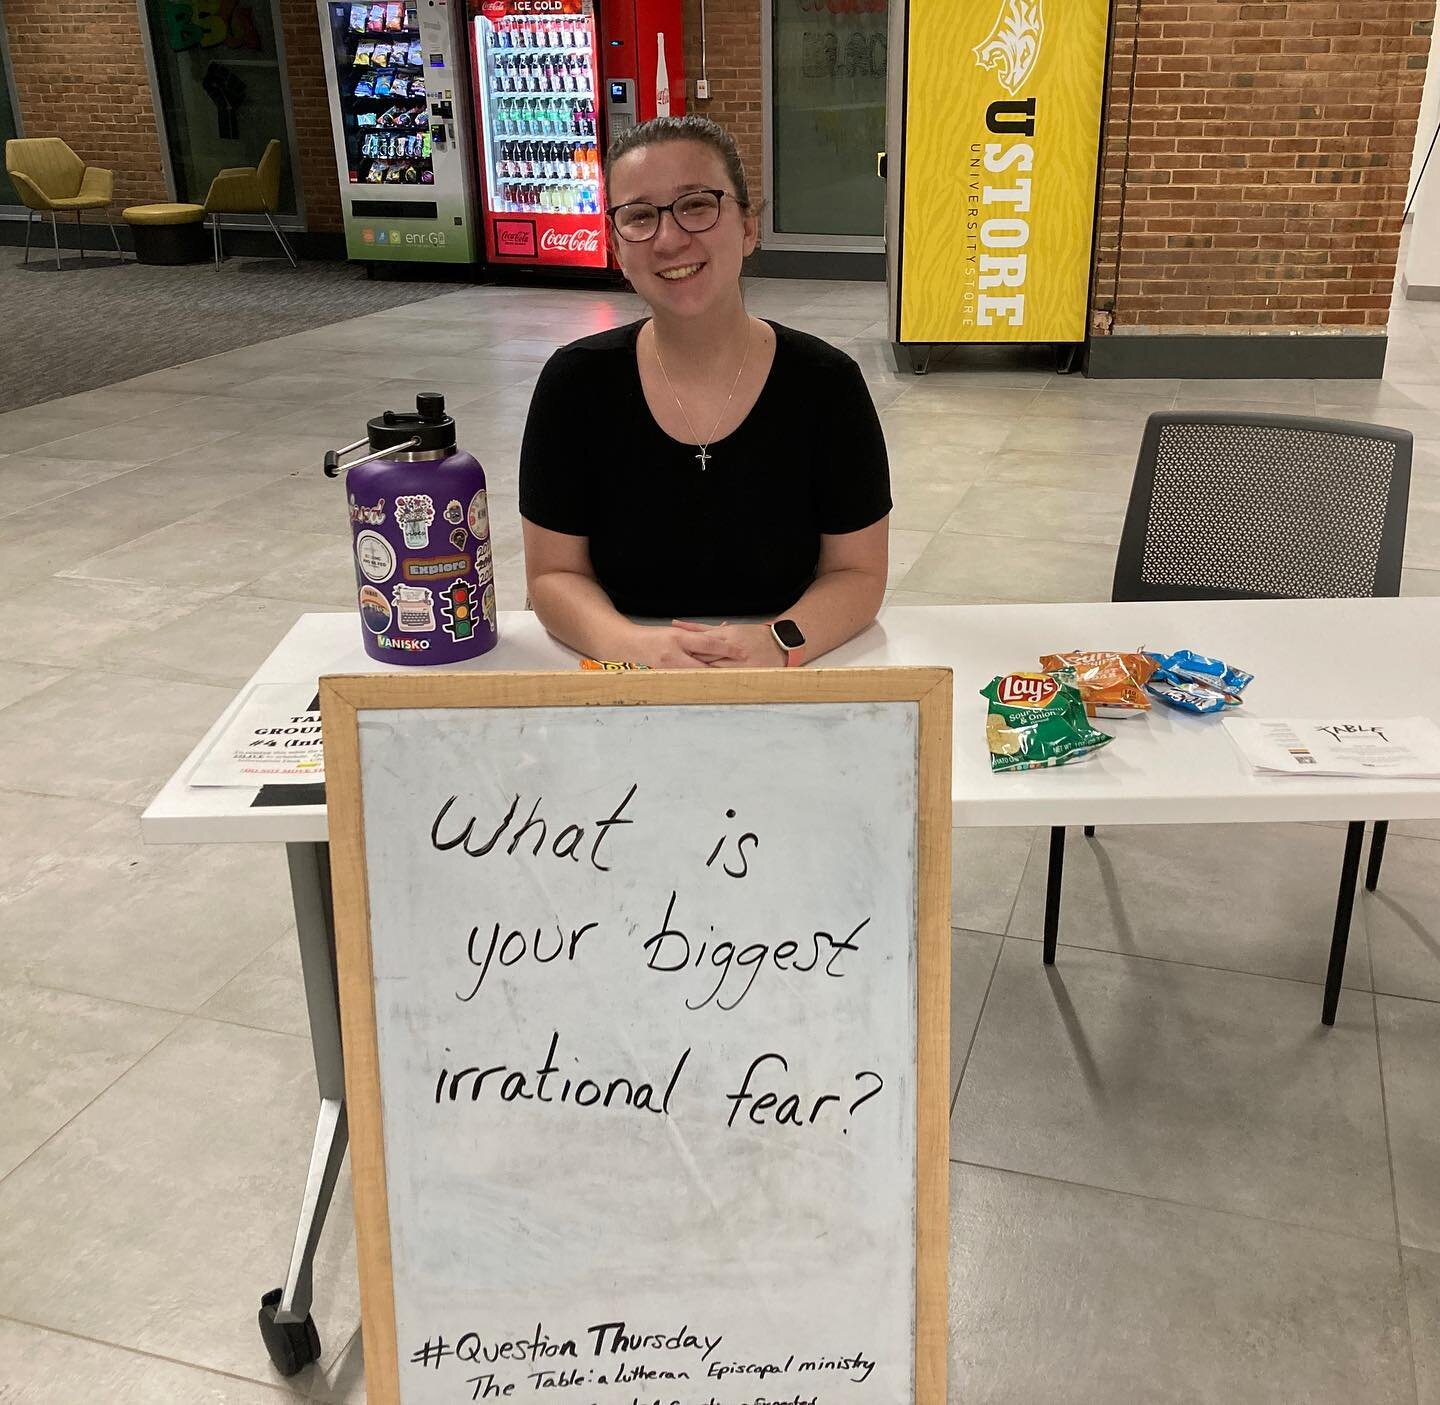 Rain moved us inside today for #questionthursday - and we learned that folks are scared of butterflies, balloons and walking over sewer grates!  What are you afraid of?